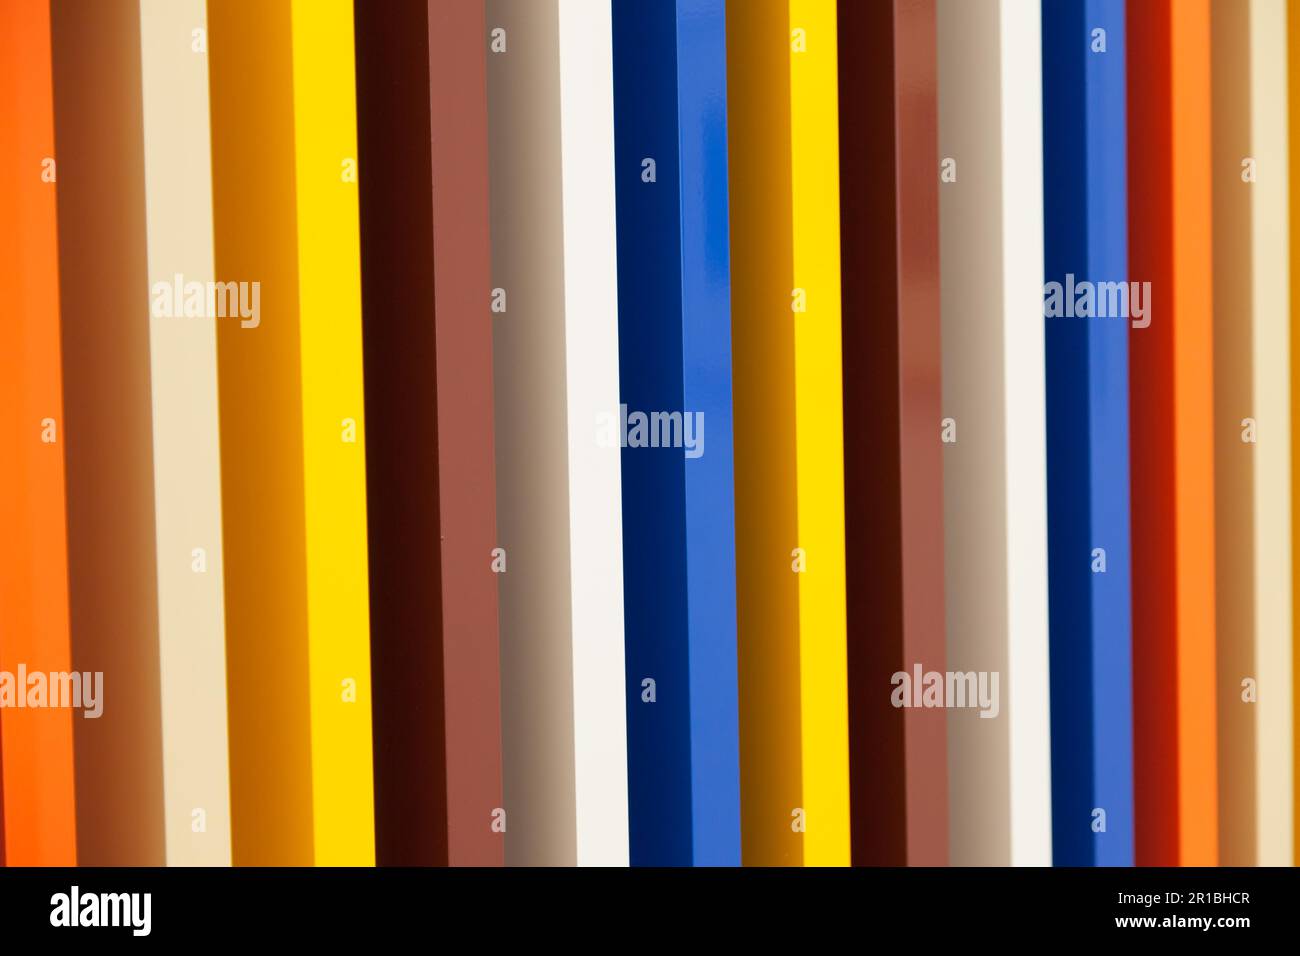 Several colors in prospective painted on wood columns Stock Photo